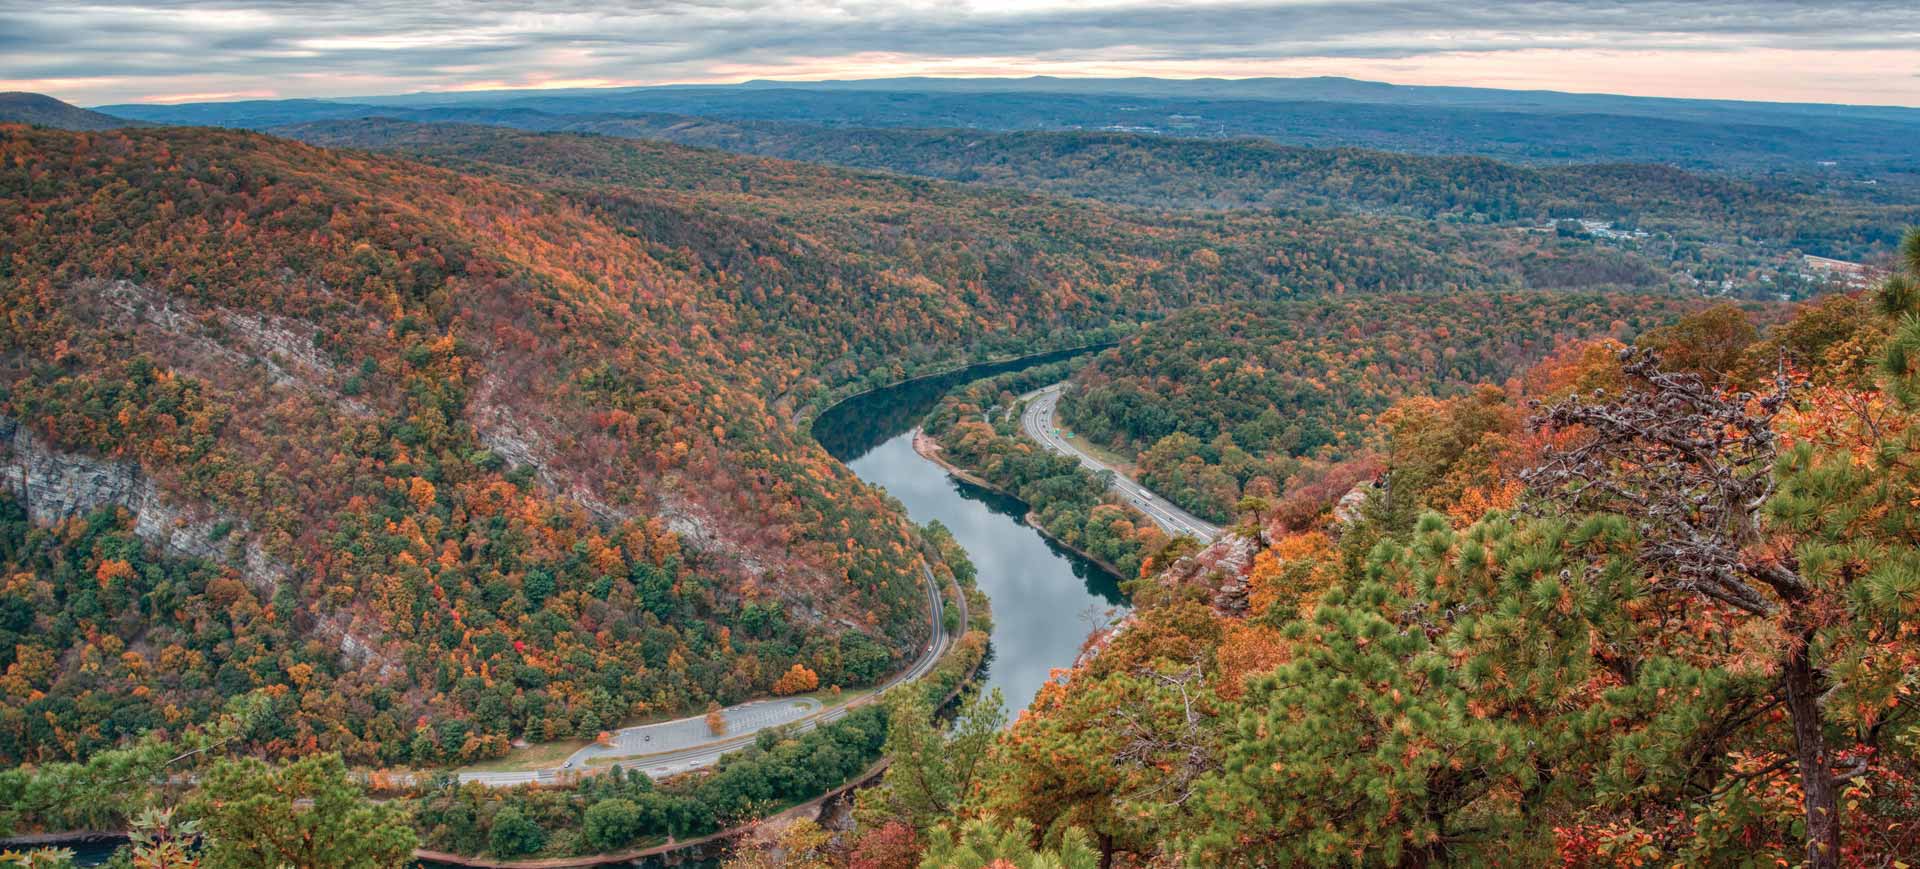 Delaware River in the Pocono Mountains during fall